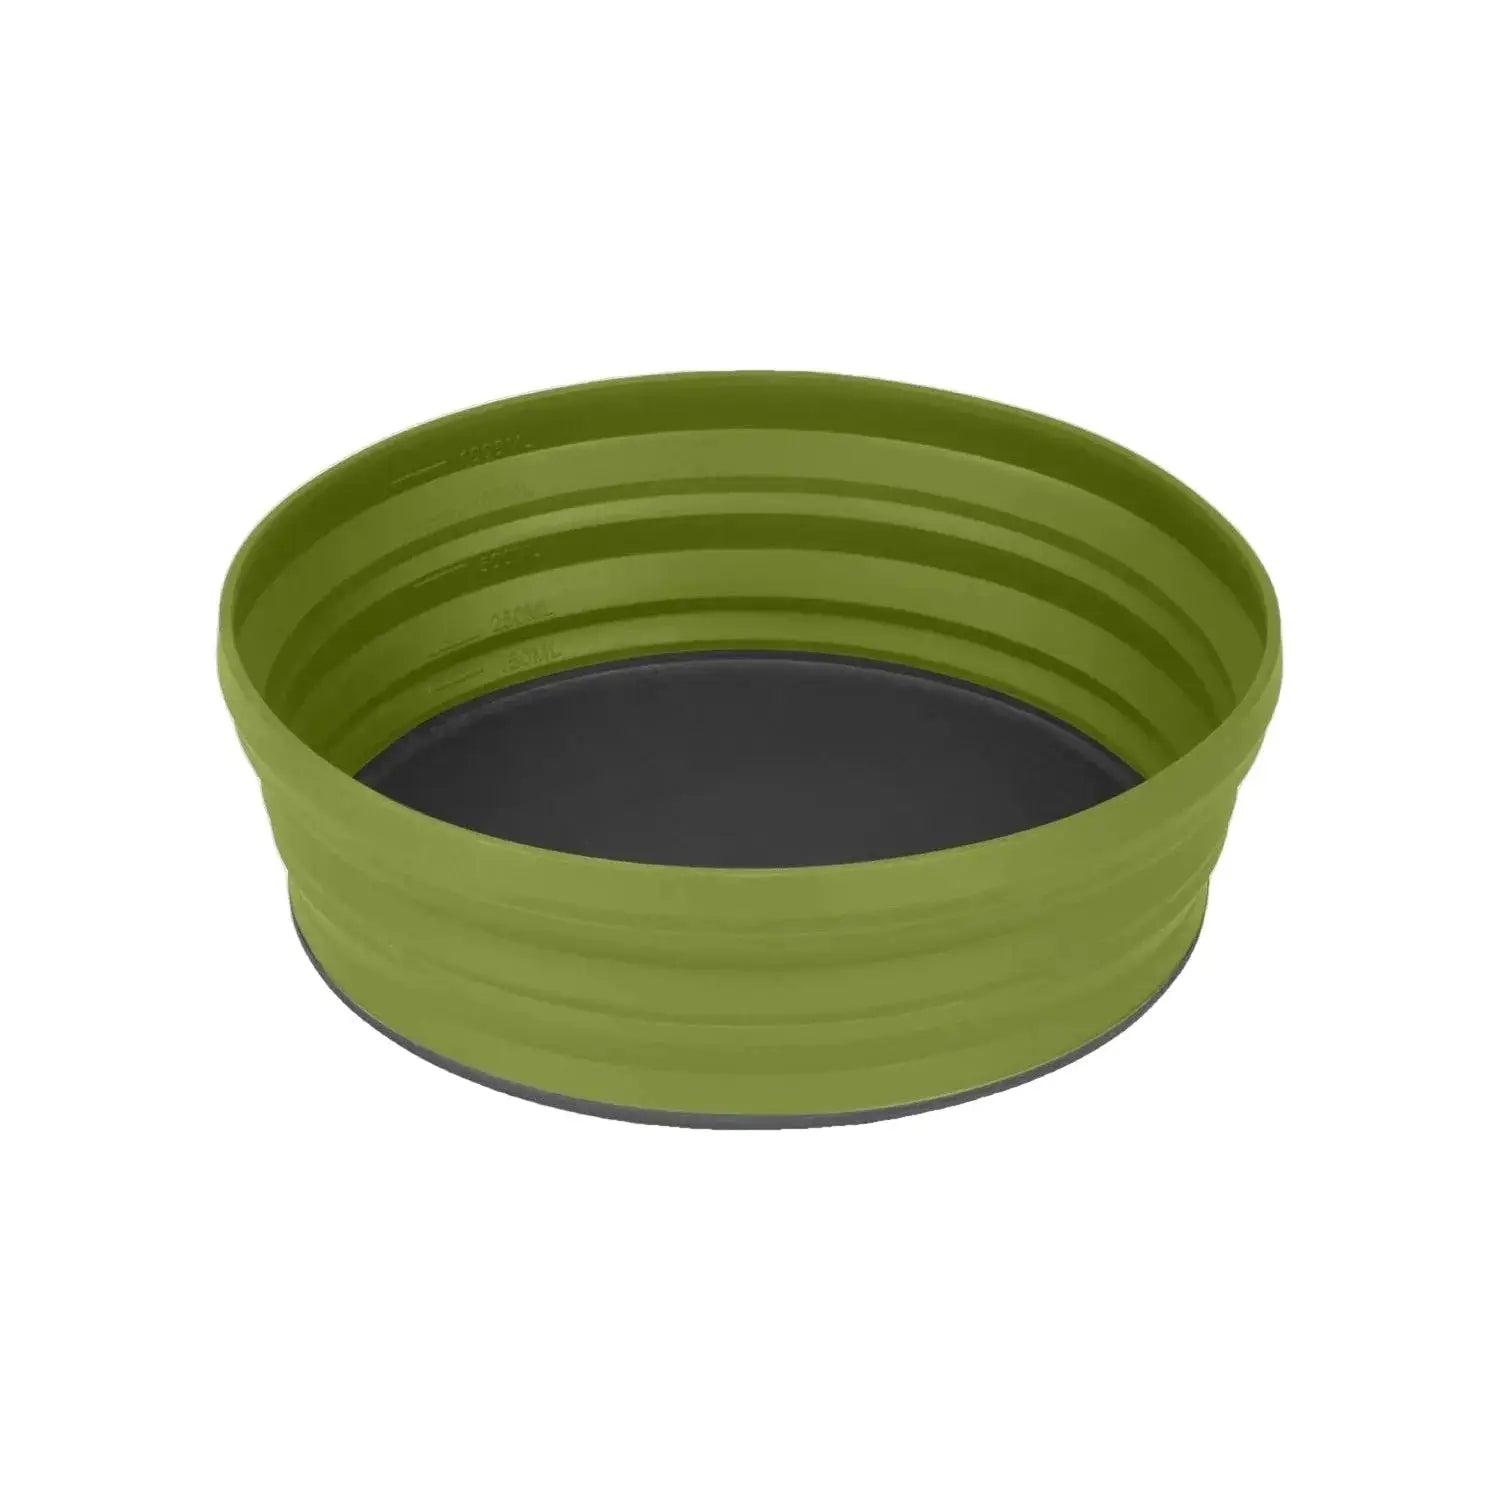 Sea to Summit XL-Bowl, Olive Green, front view 